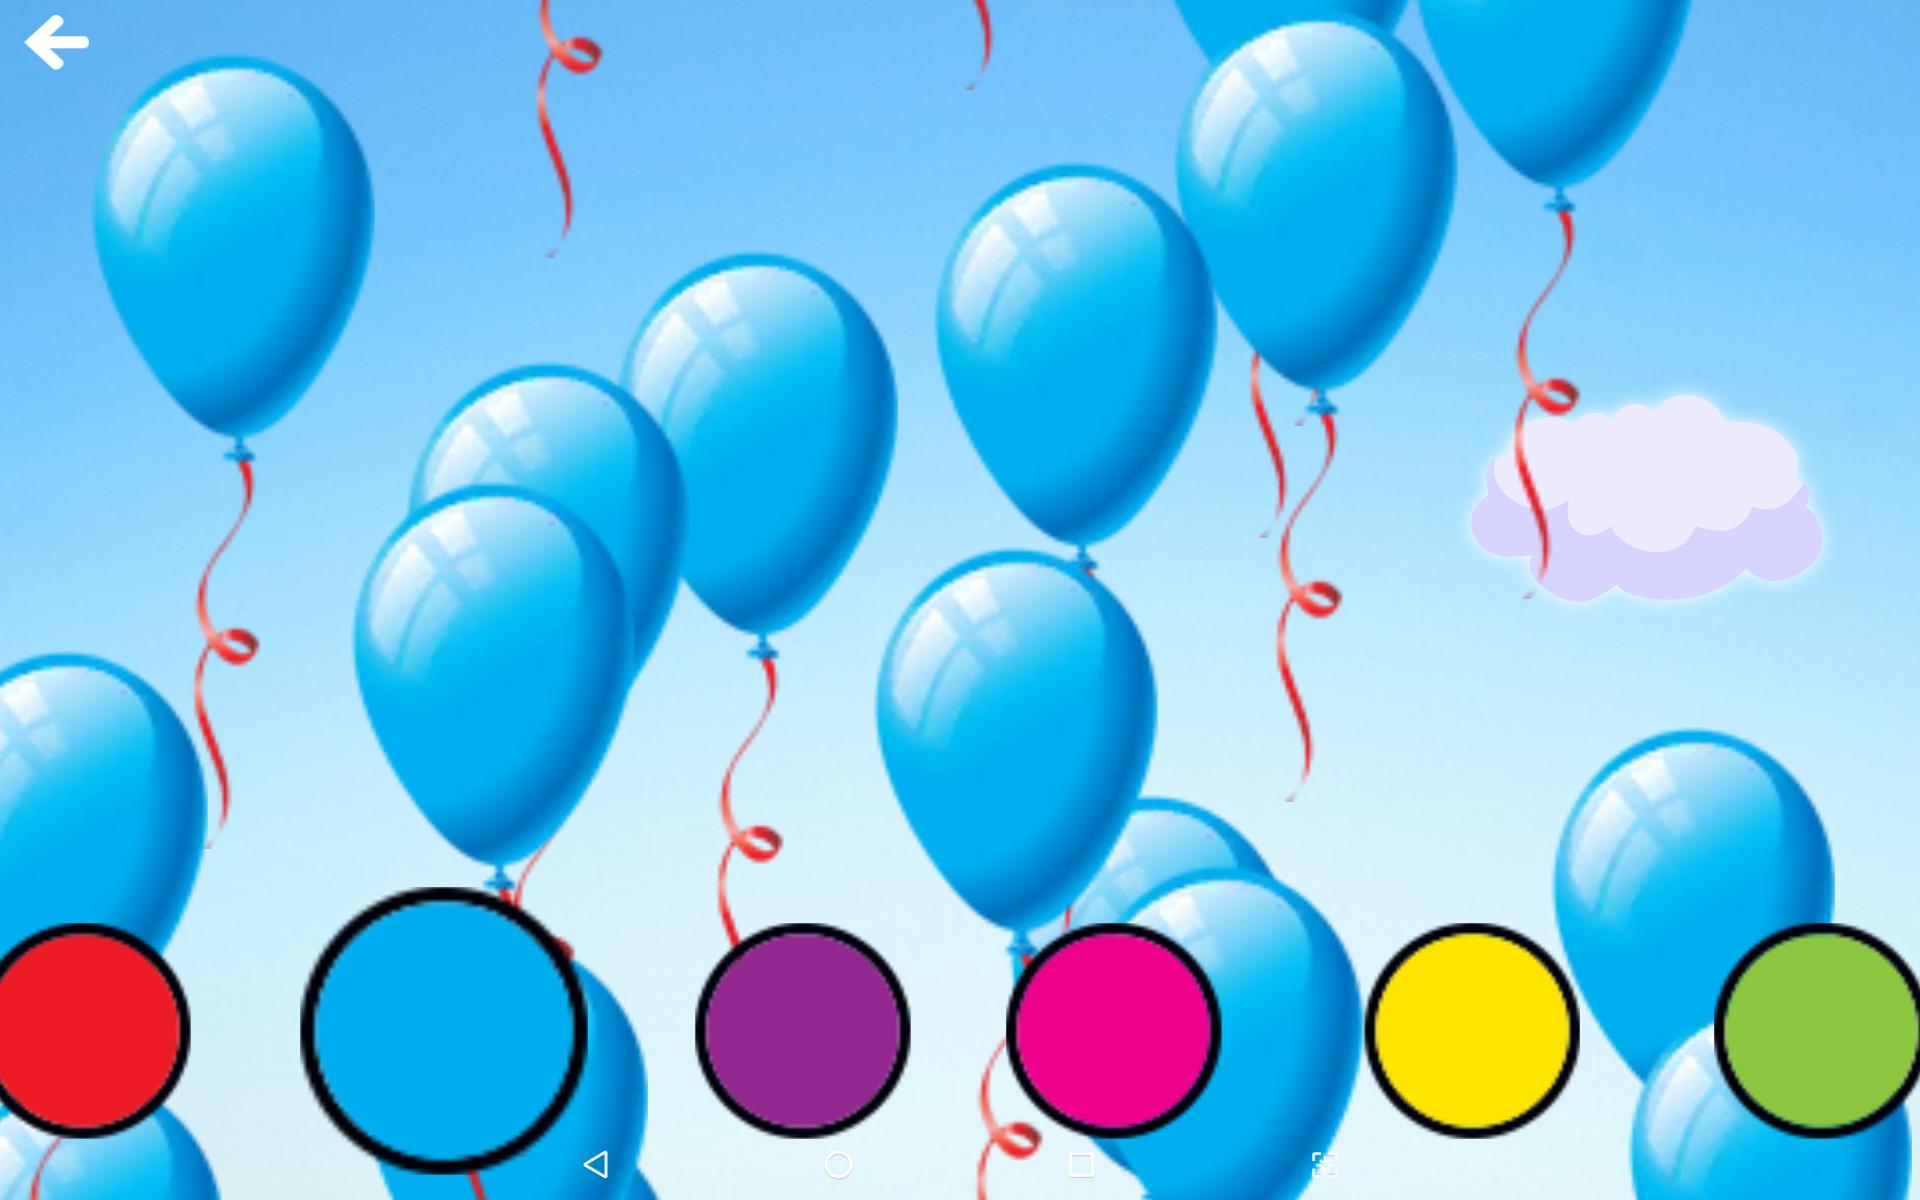 Smart balloons for Android - APK Download